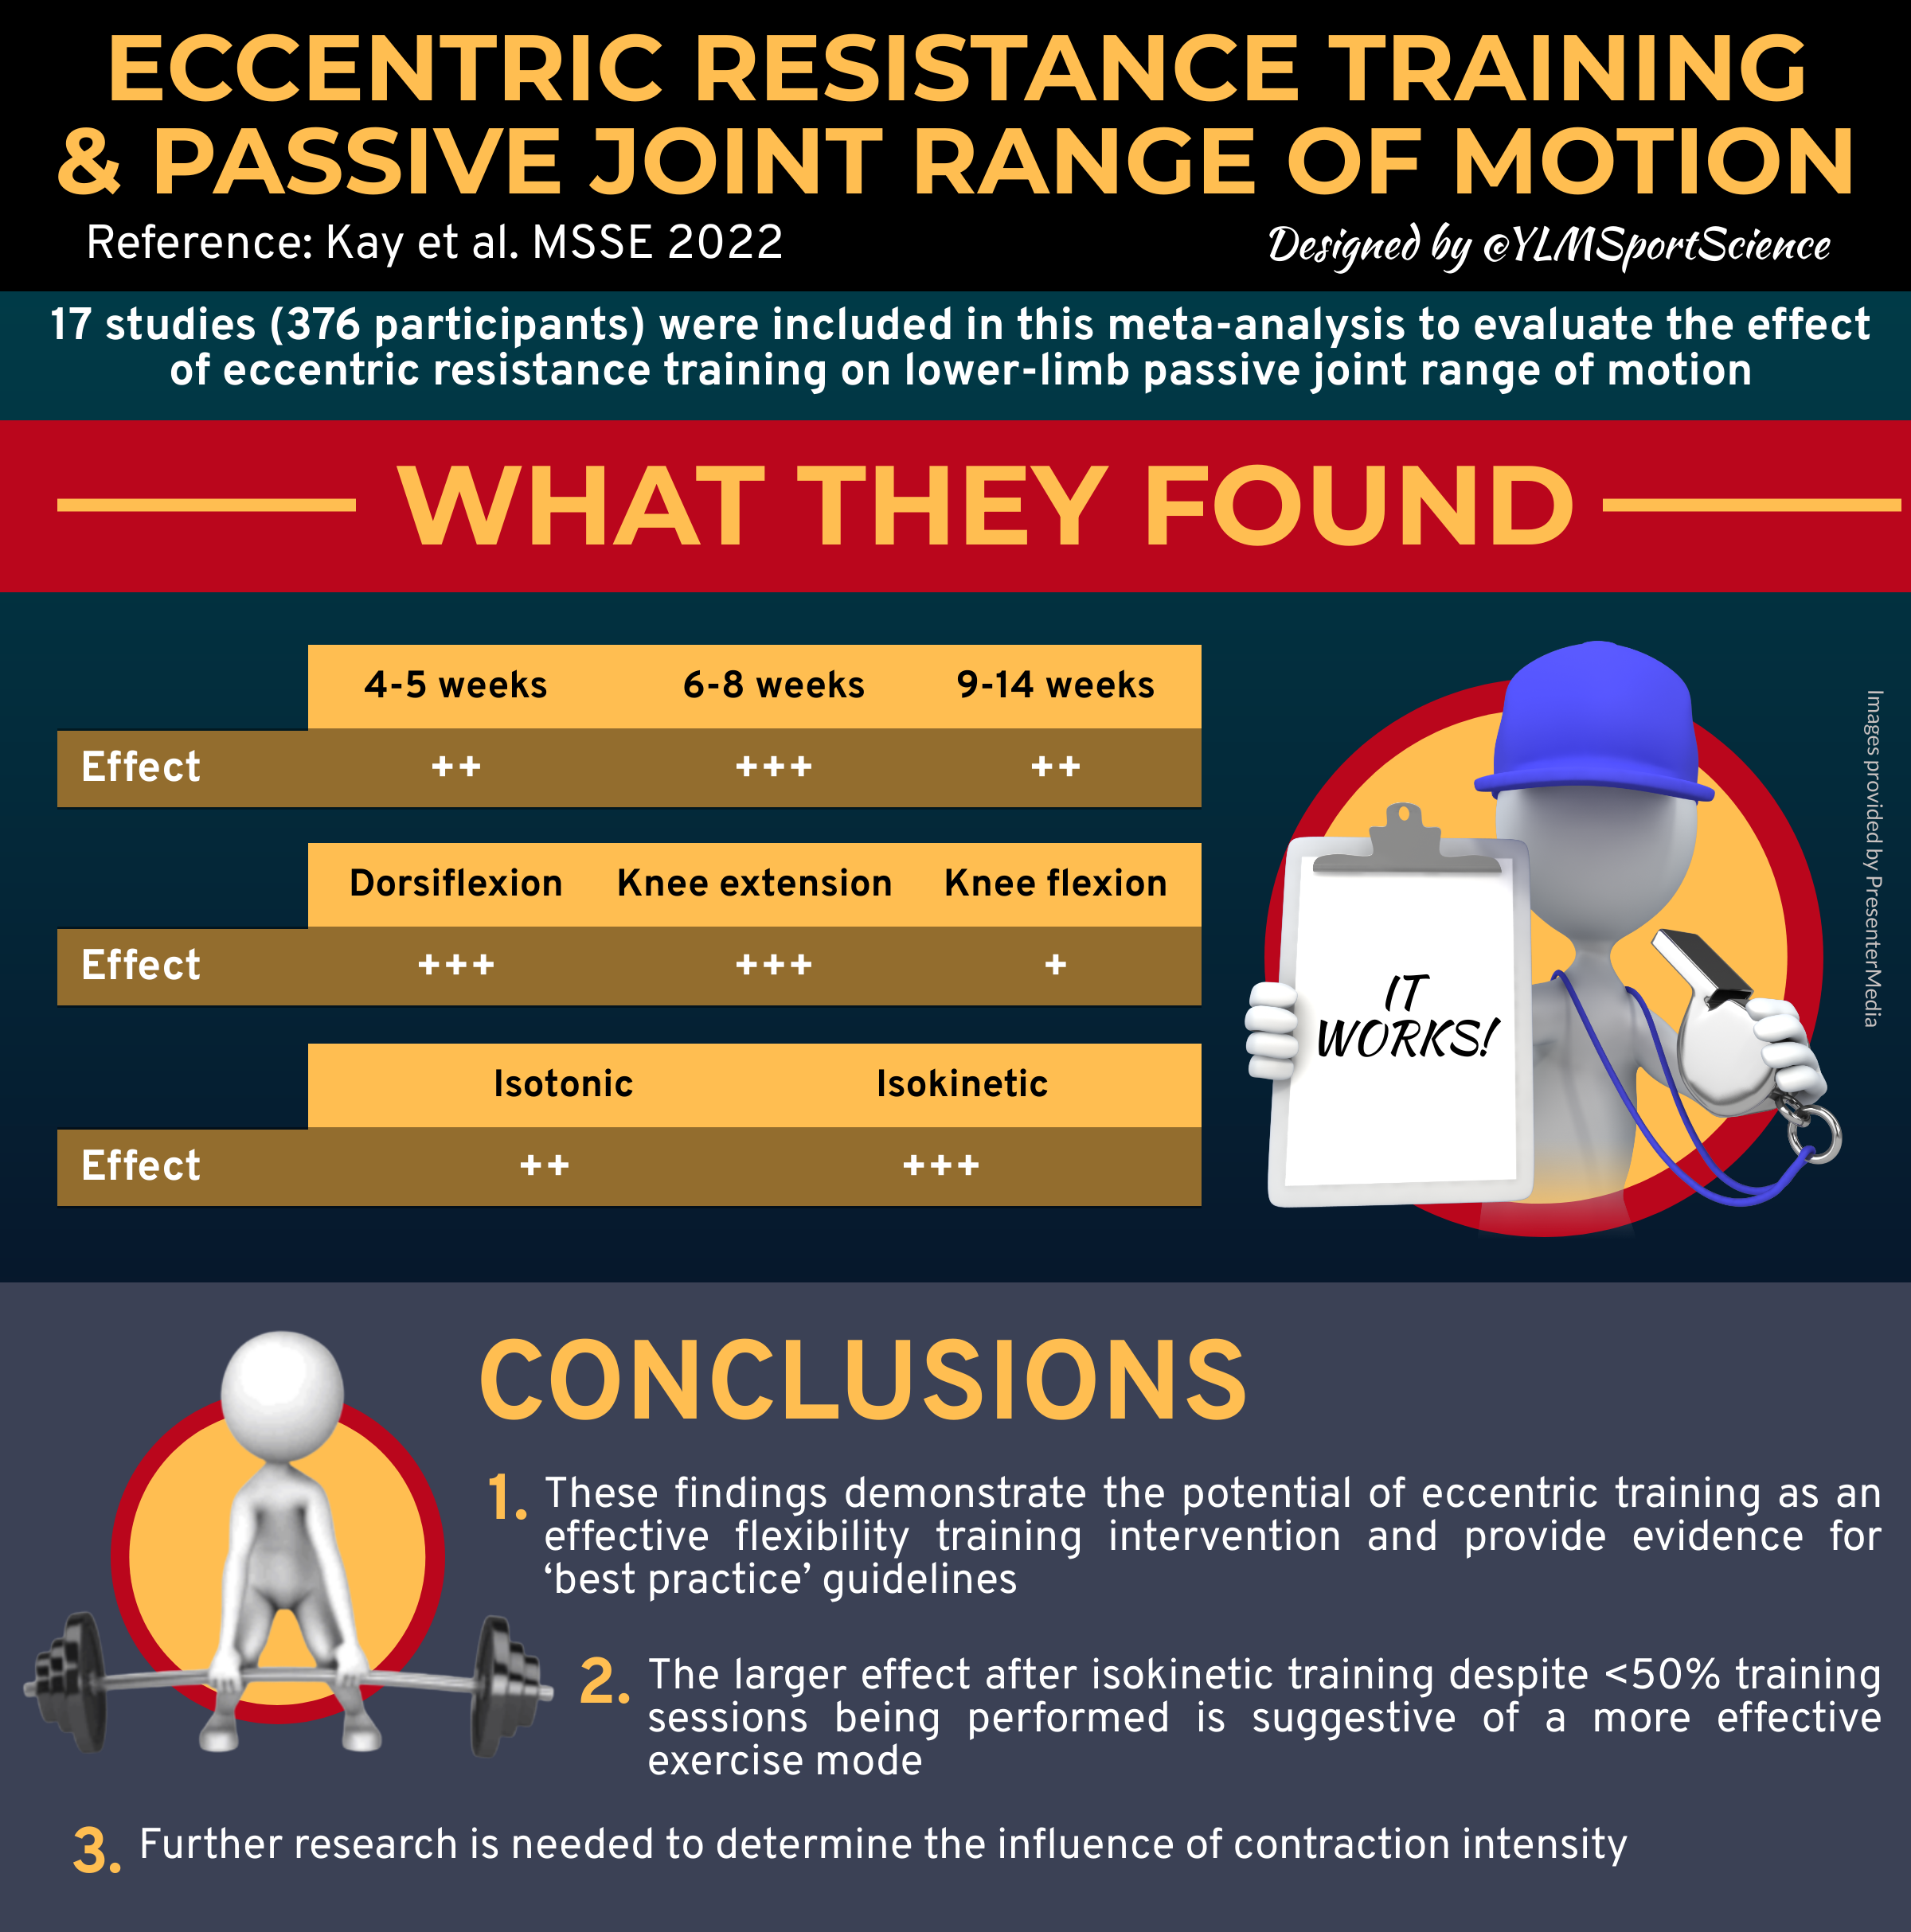 Effects of Eccentric Resistance Training on Lower-limb Passive Joint Range of Motion